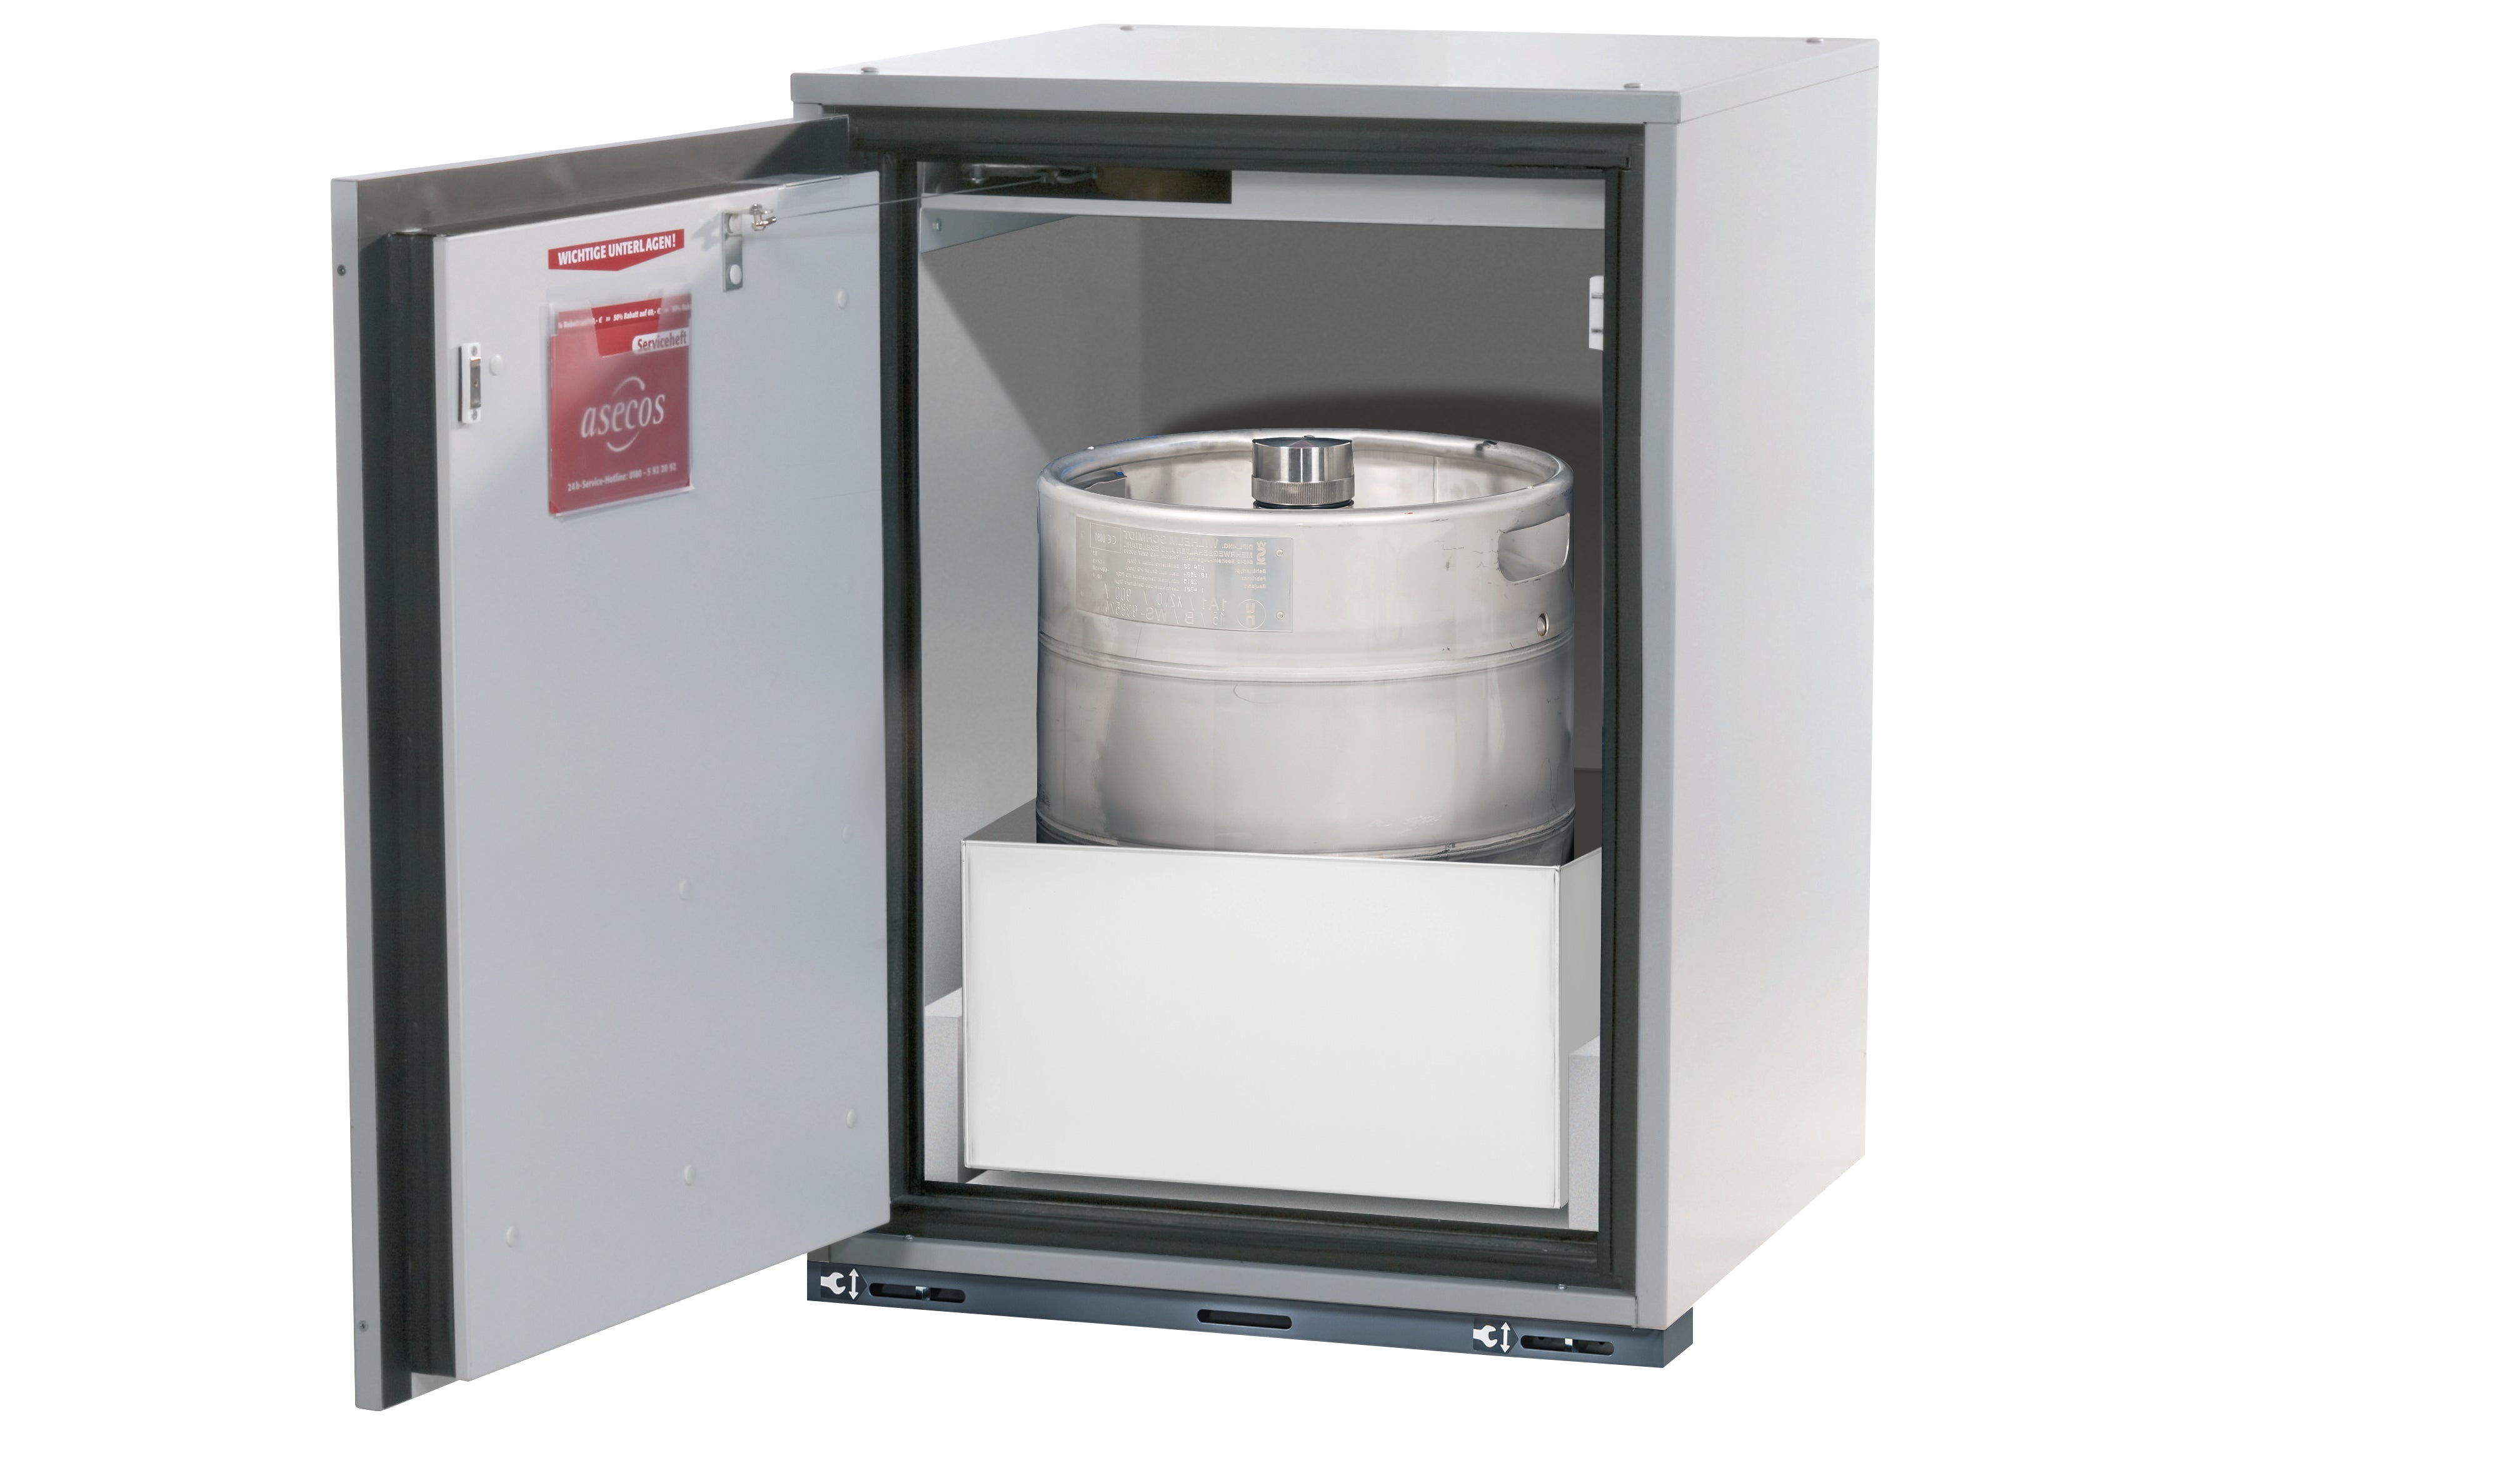 Type 90 safety base cabinet UB-T-90 model UB90.080.059.060.T in light gray RAL 7035 with 1x pull-out tray STAWA-R max. interior height (sheet steel)